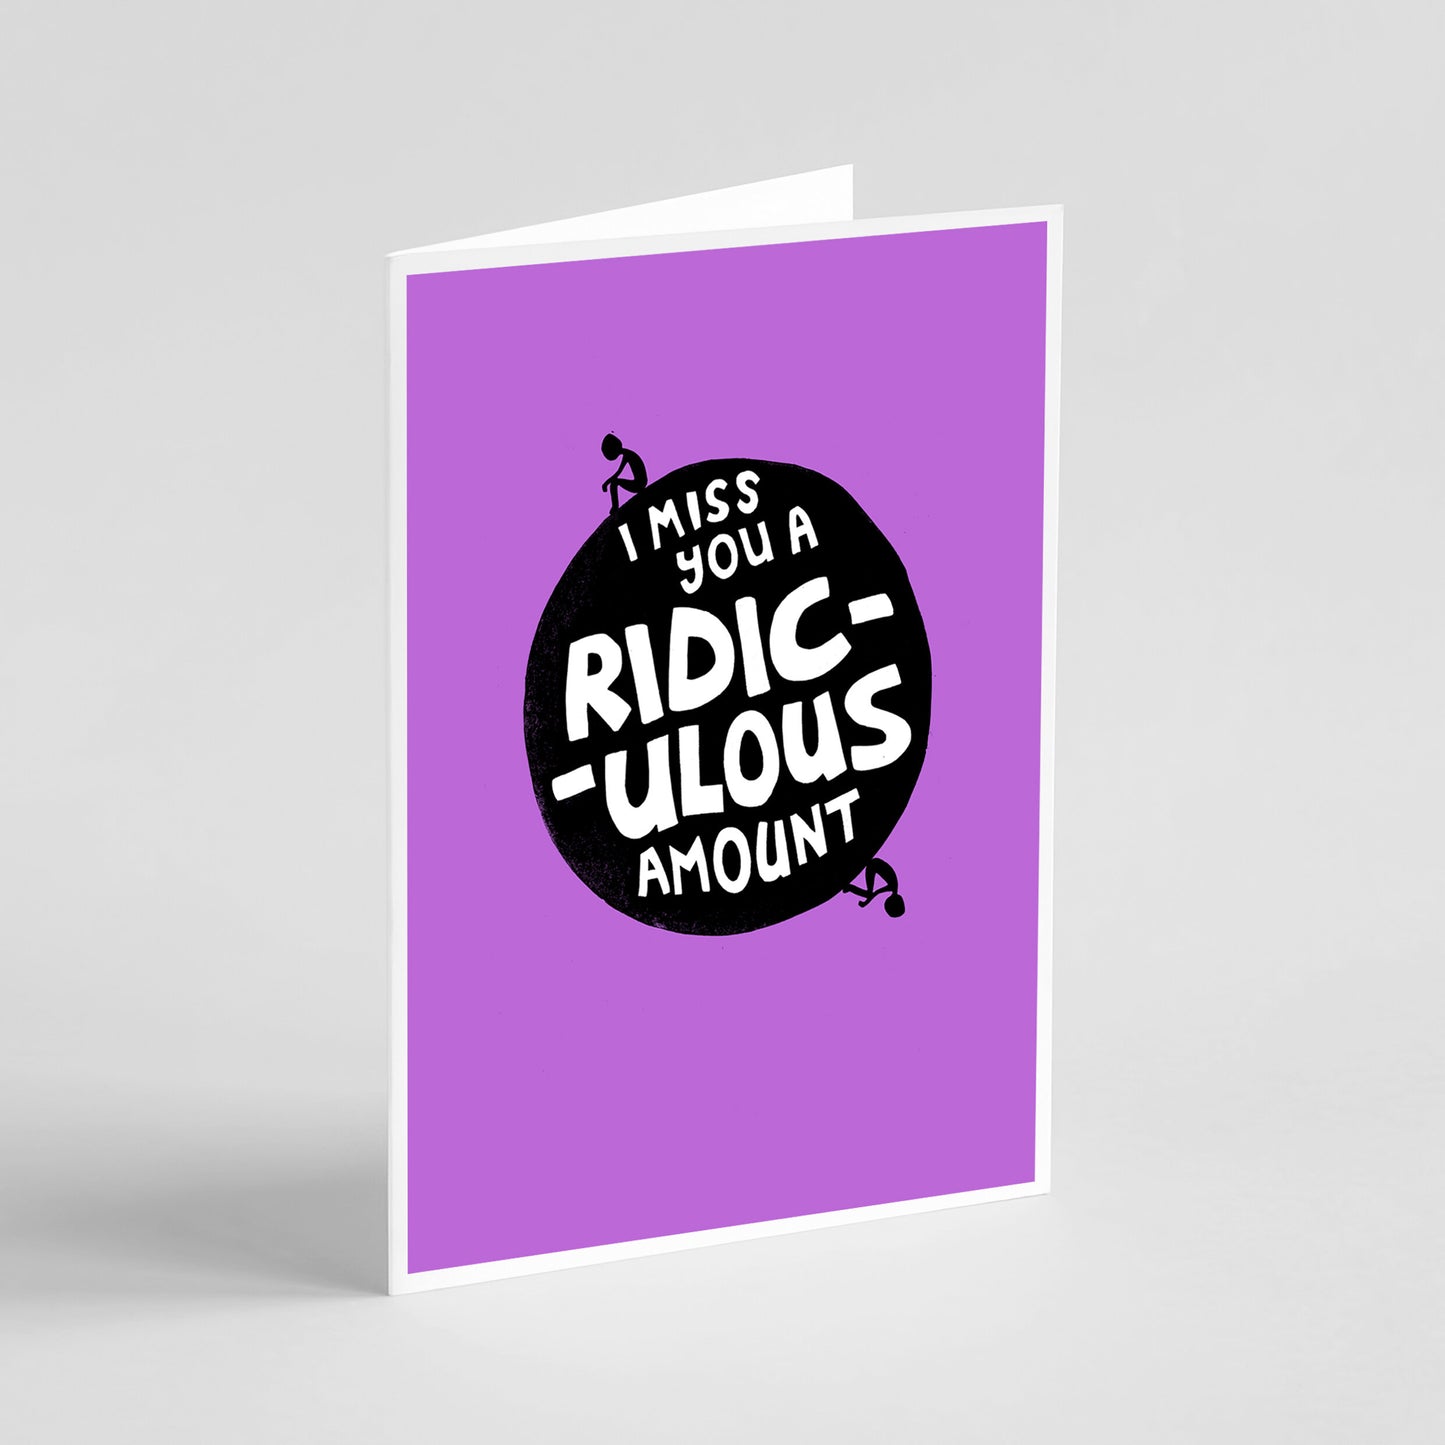 I Miss You A Ridiculous Amount - Card